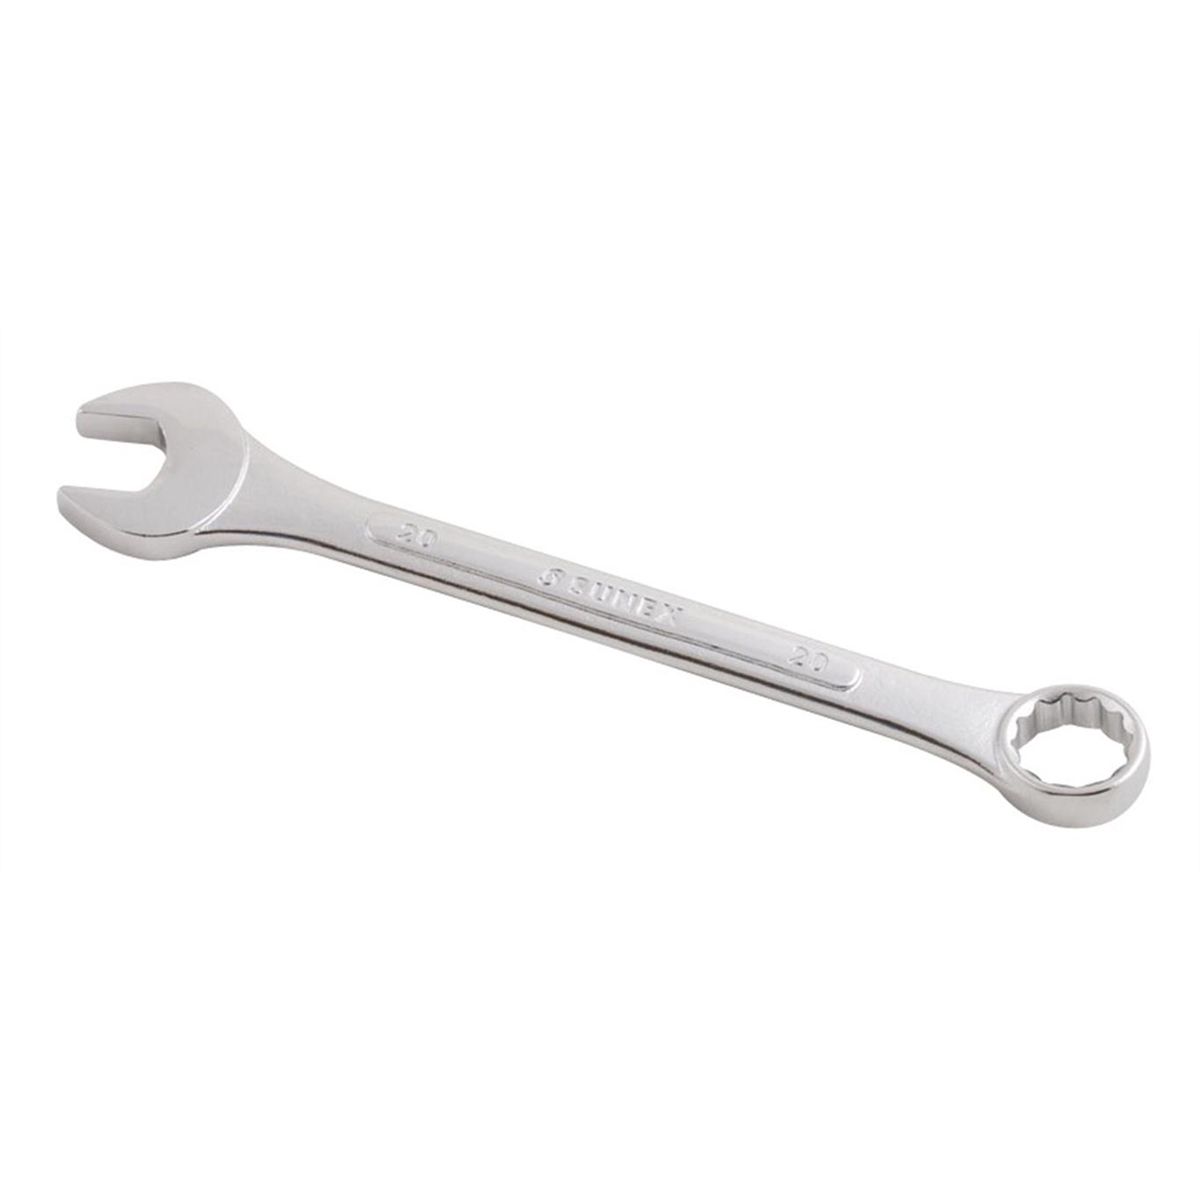 20mm Raised Panel Combination Wrench